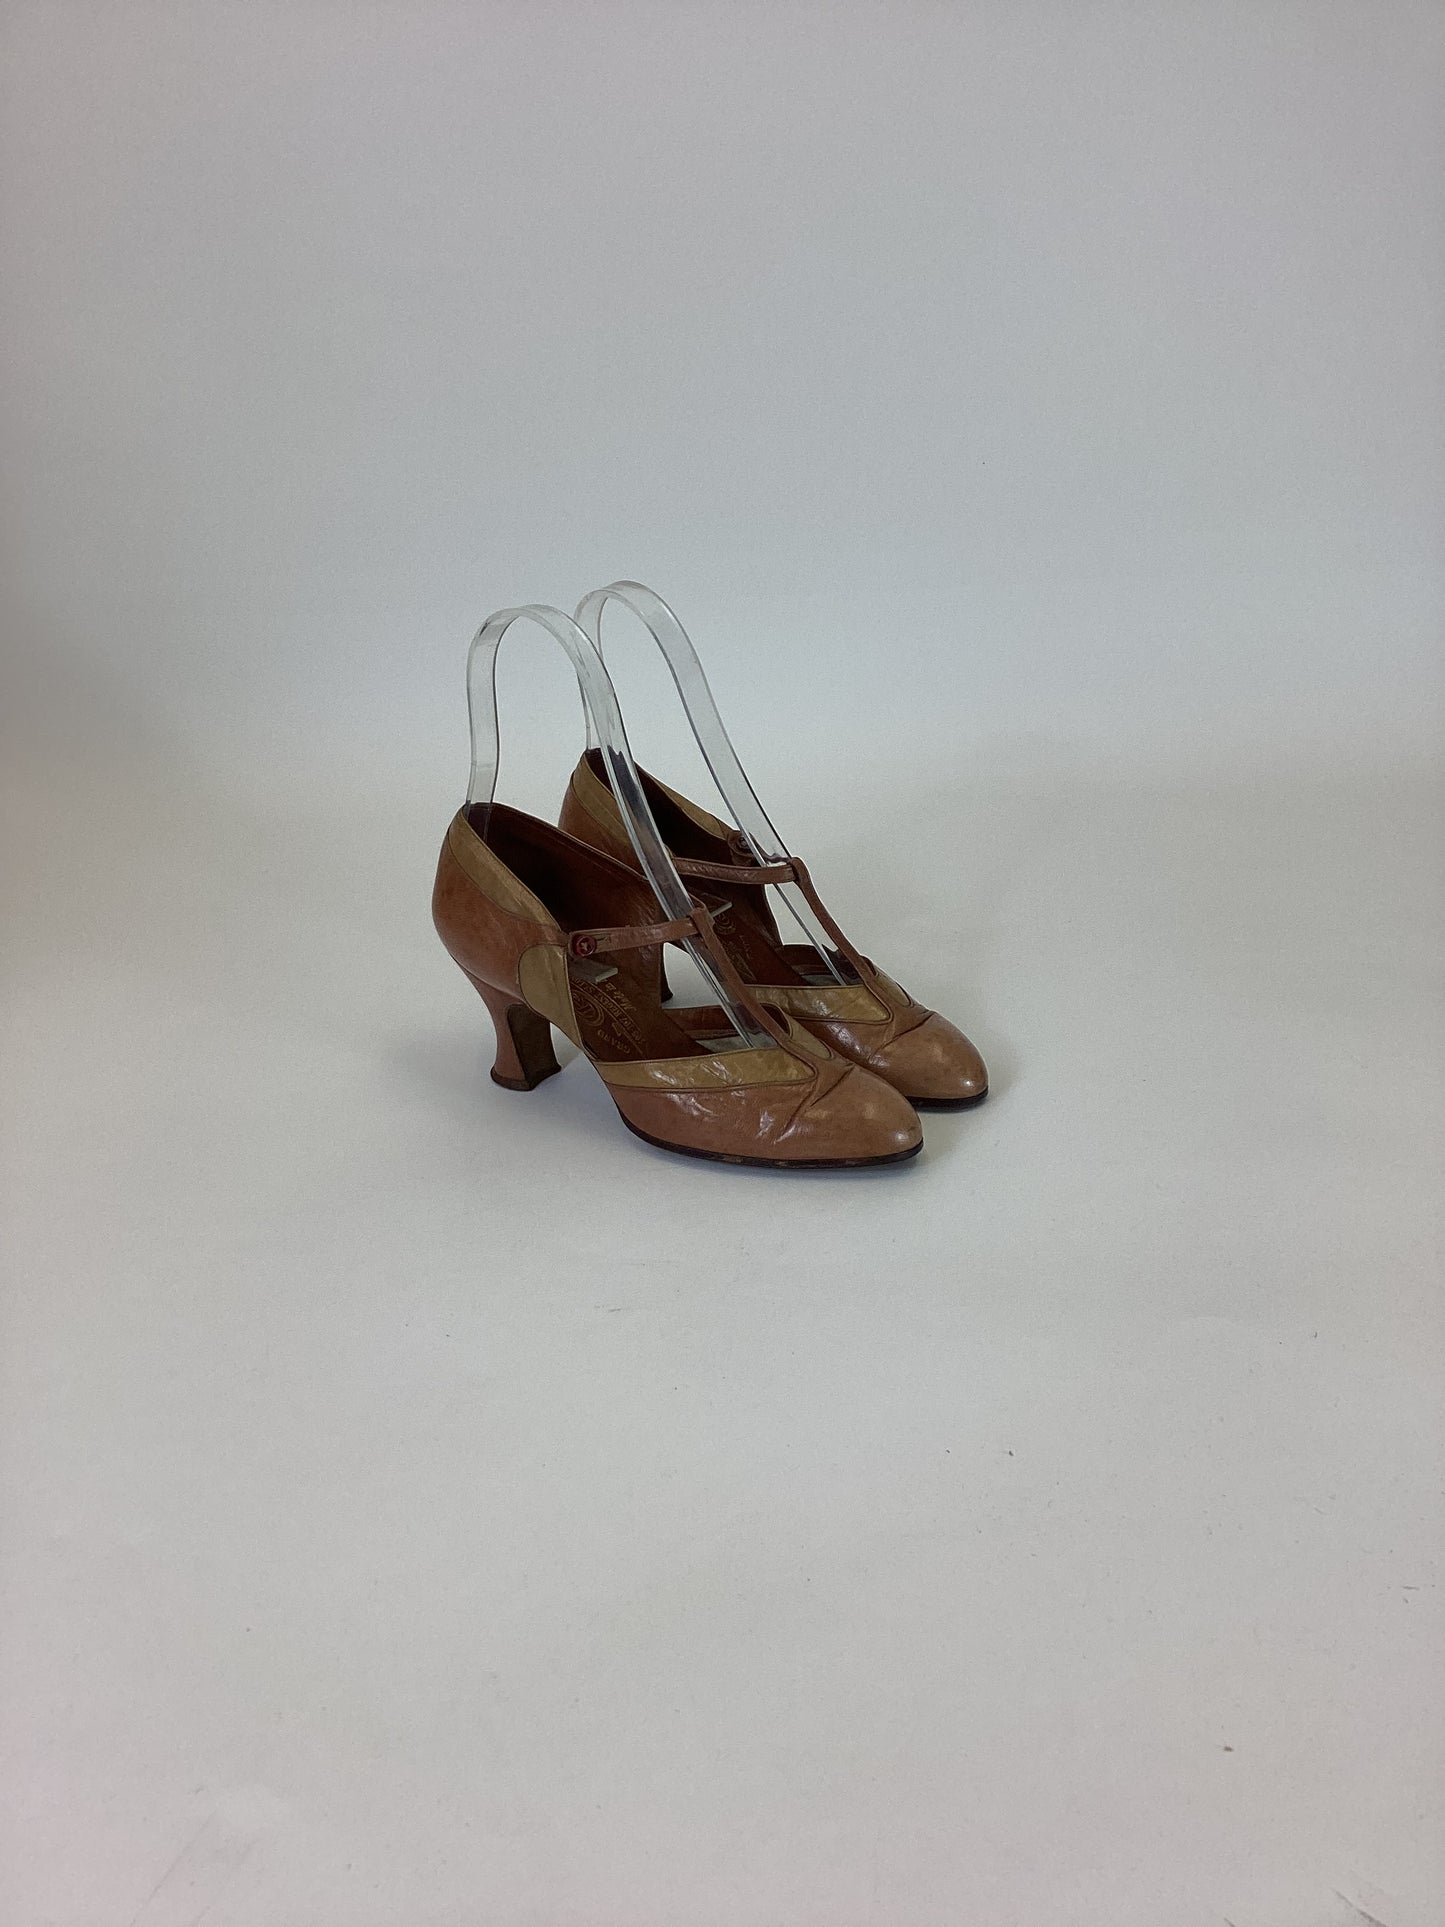 Original 20's/30's stunning 2 tone shoes - in taupe and sand colourway